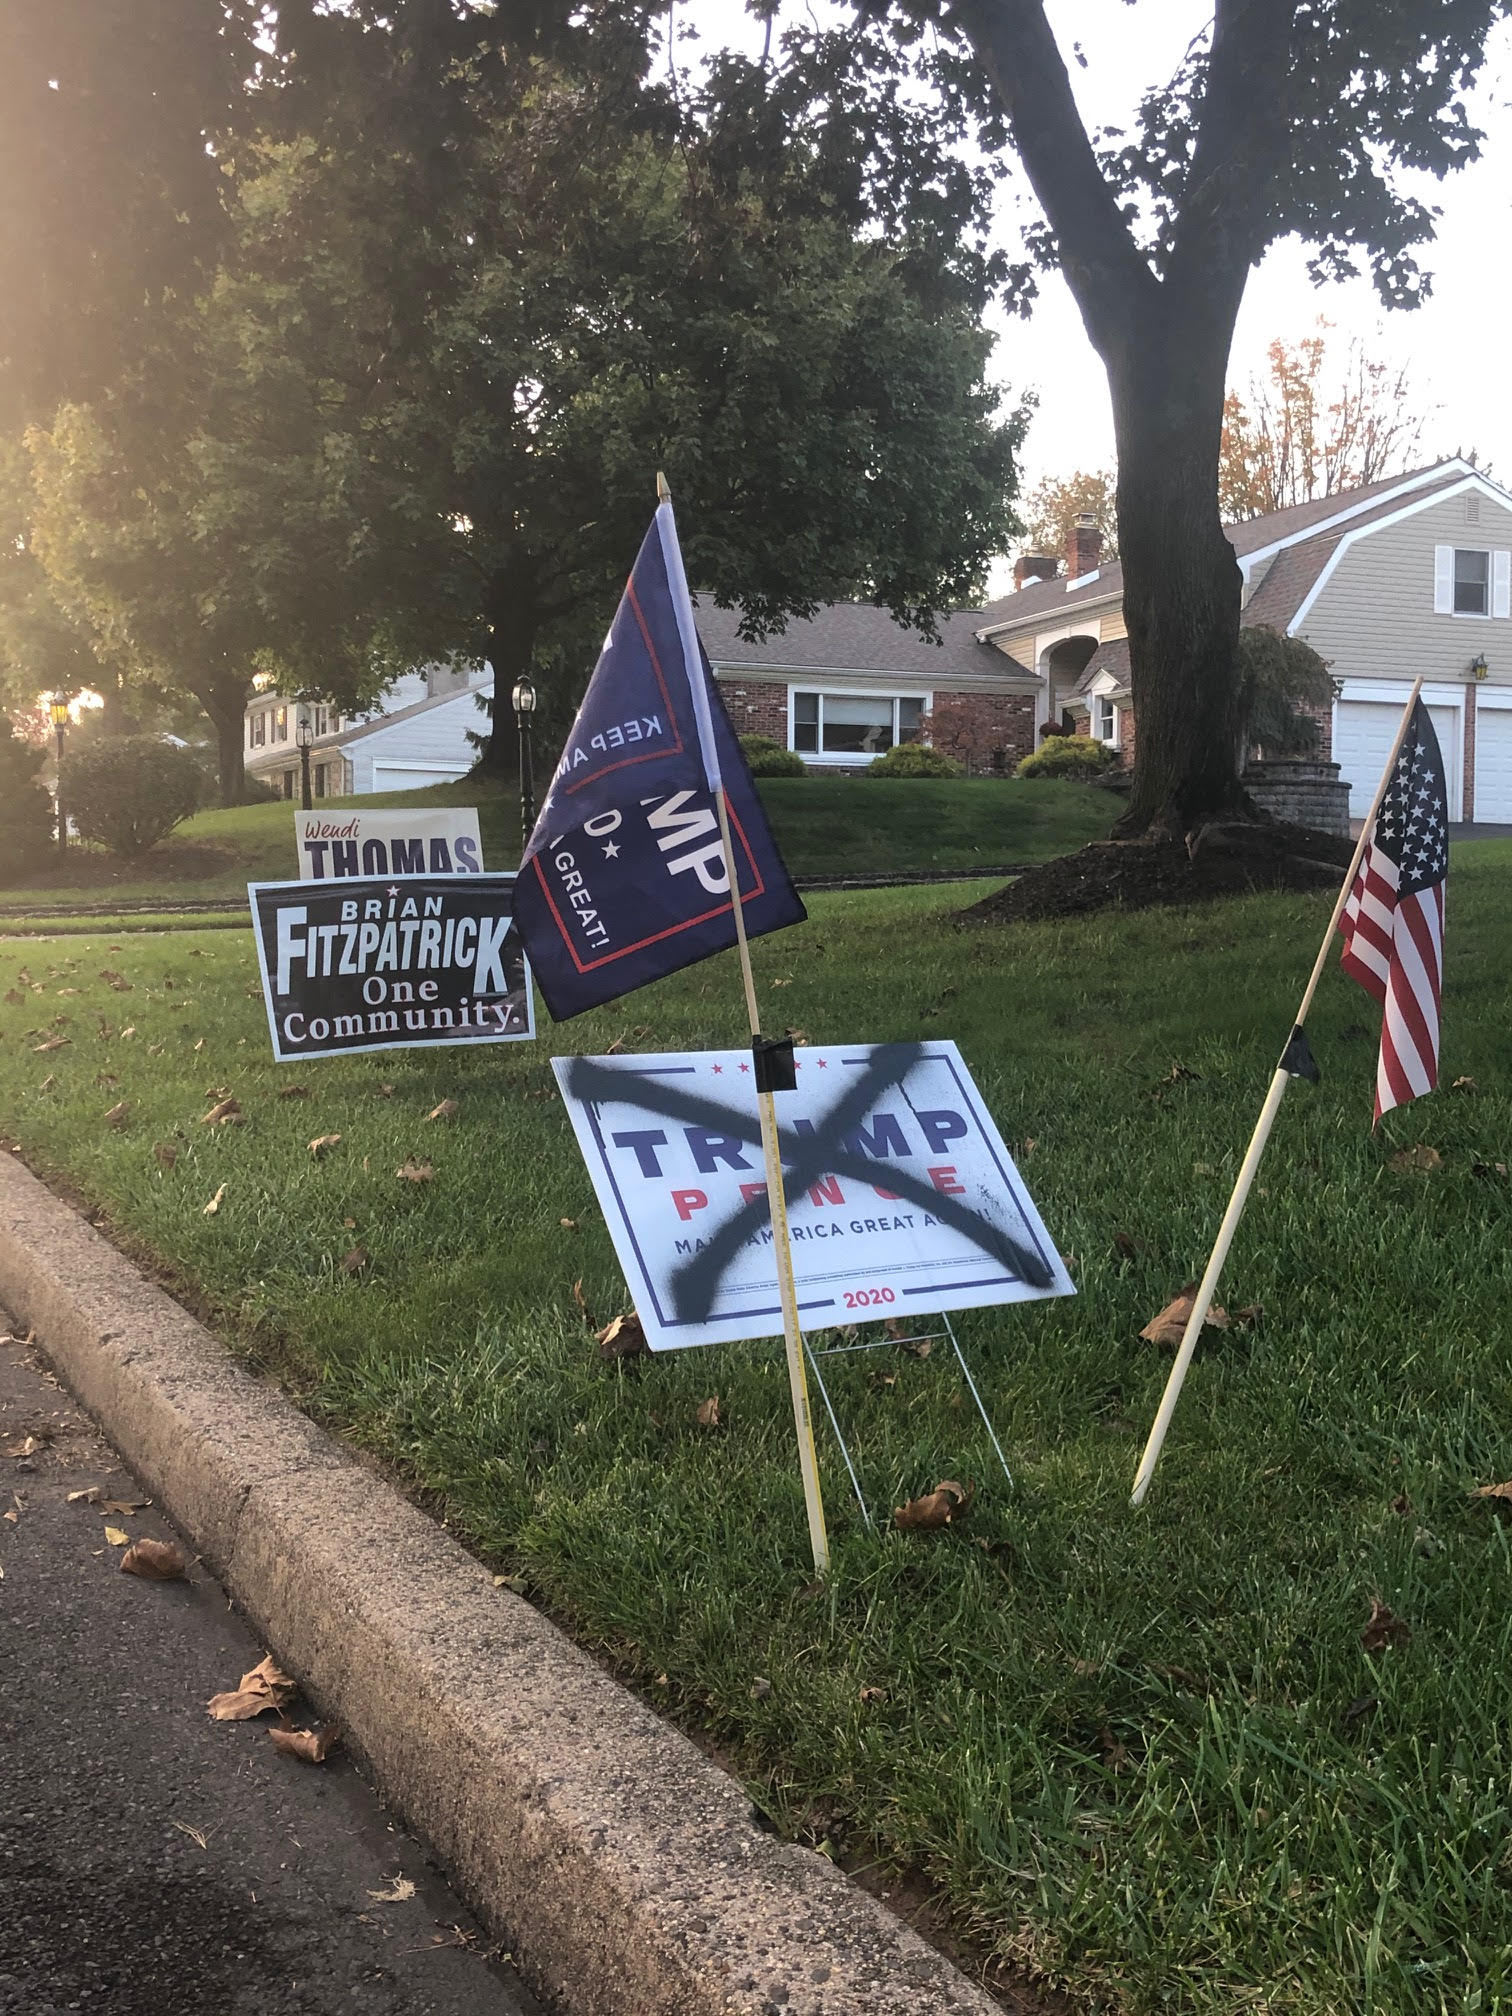 In Kathryn Jankowski's home of Bucks County, PA, front lawns are littered with competing political signs.